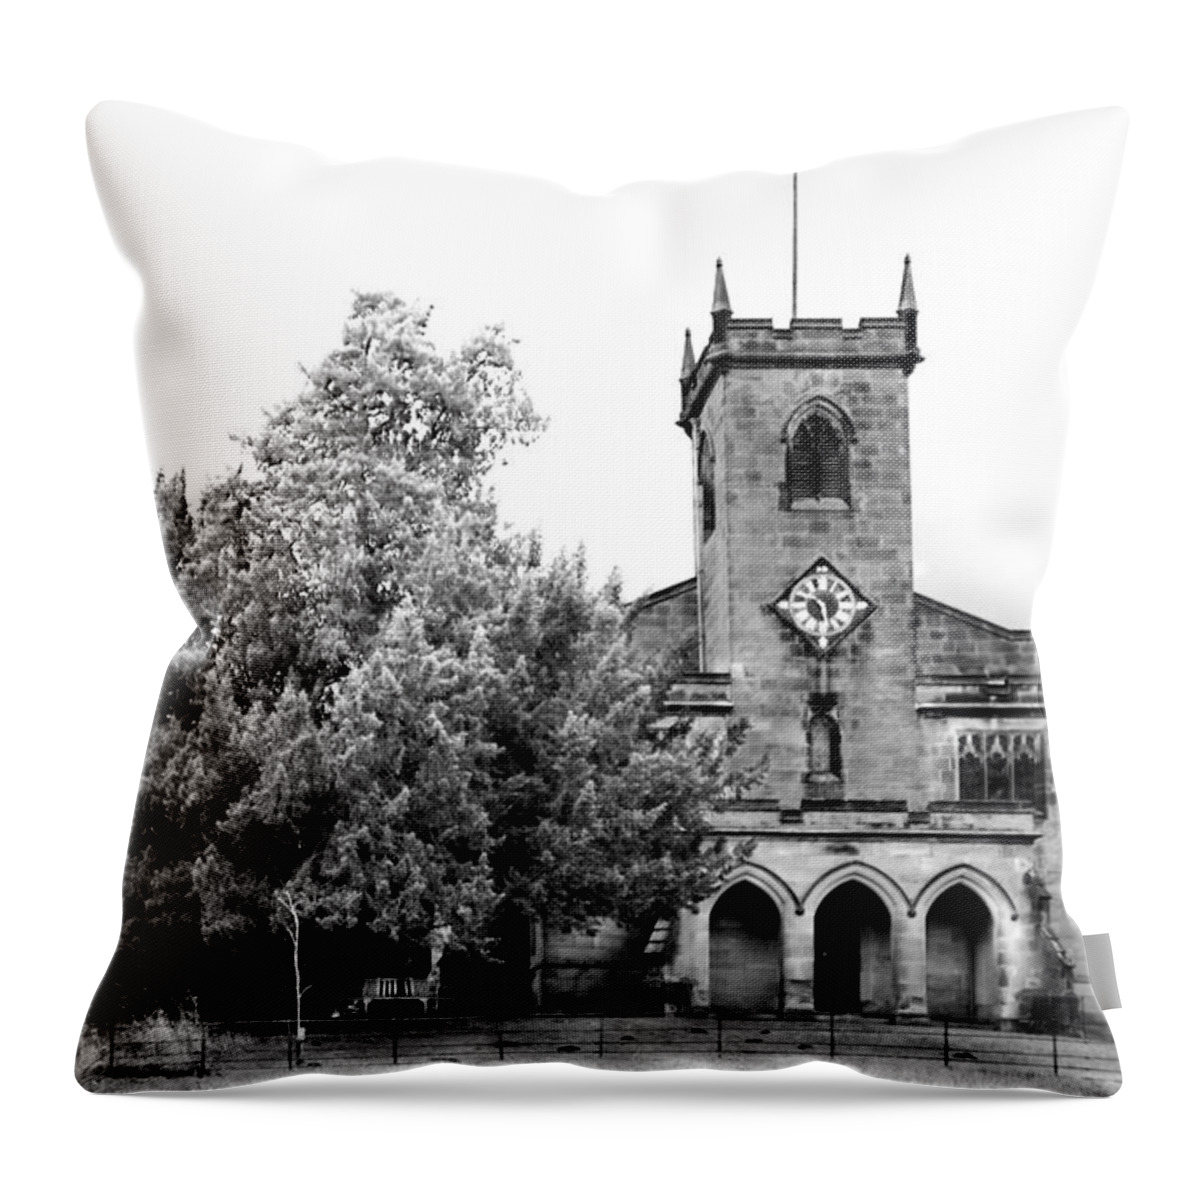 Church Throw Pillow featuring the photograph Lwv10033 by Lee Winter